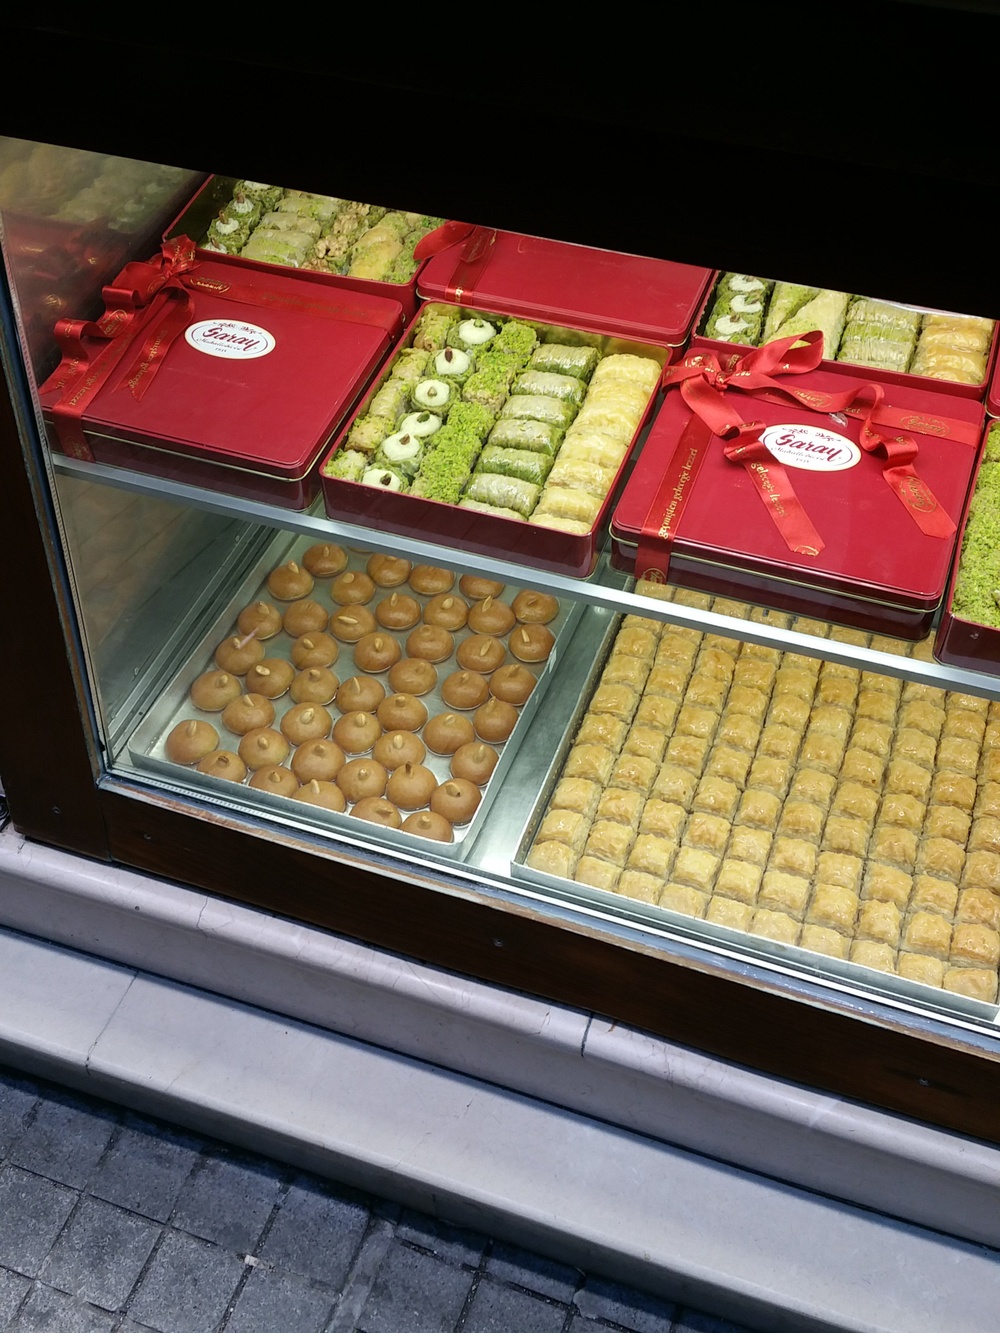  Baklava! Although apparently a good rule of thumb is the prettier the display the worse the baklava. 